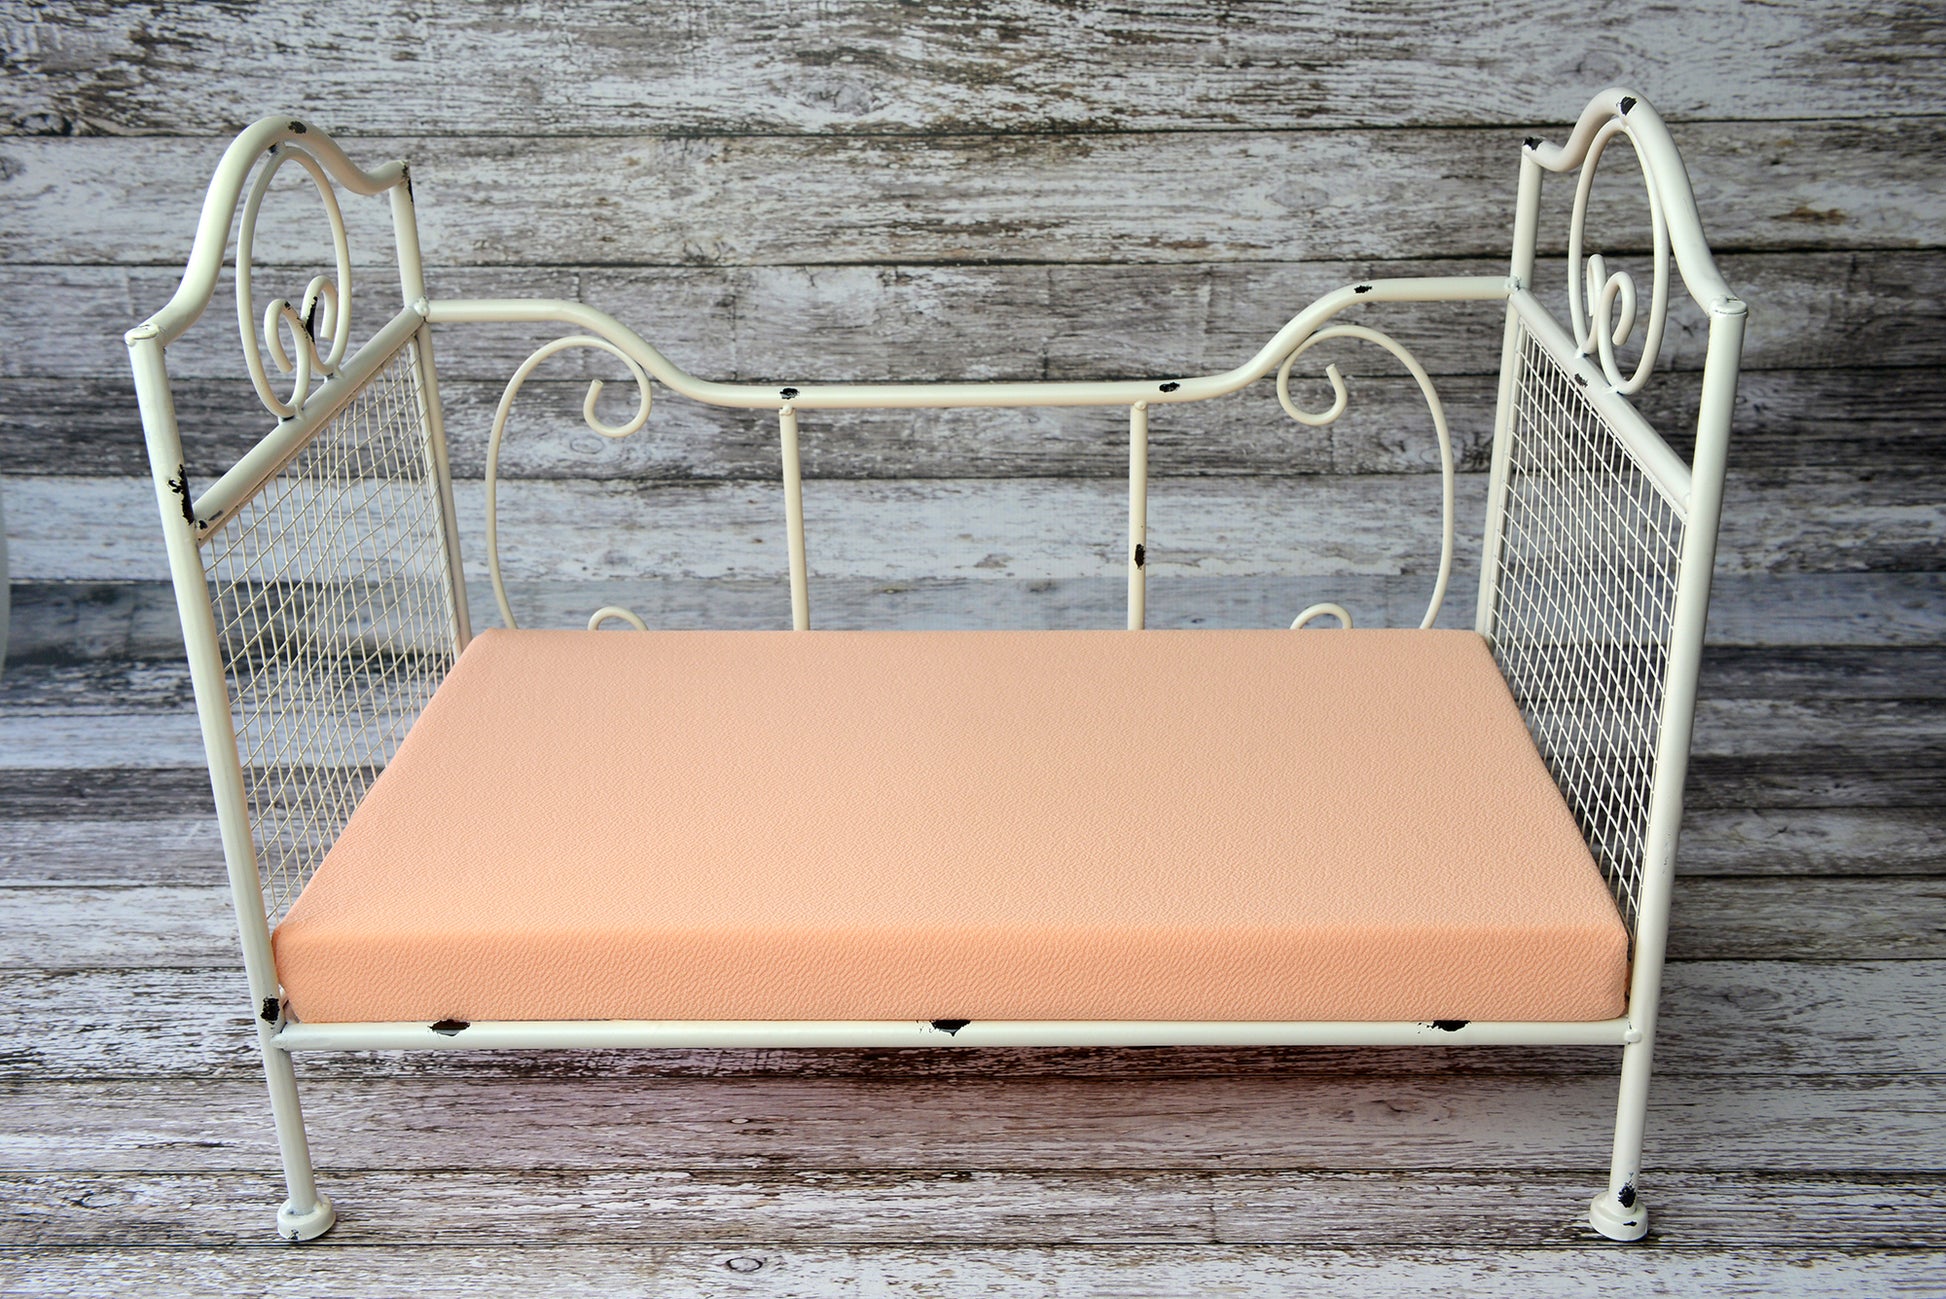 Mattress with Cover - Textured - Peach-Newborn Photography Props